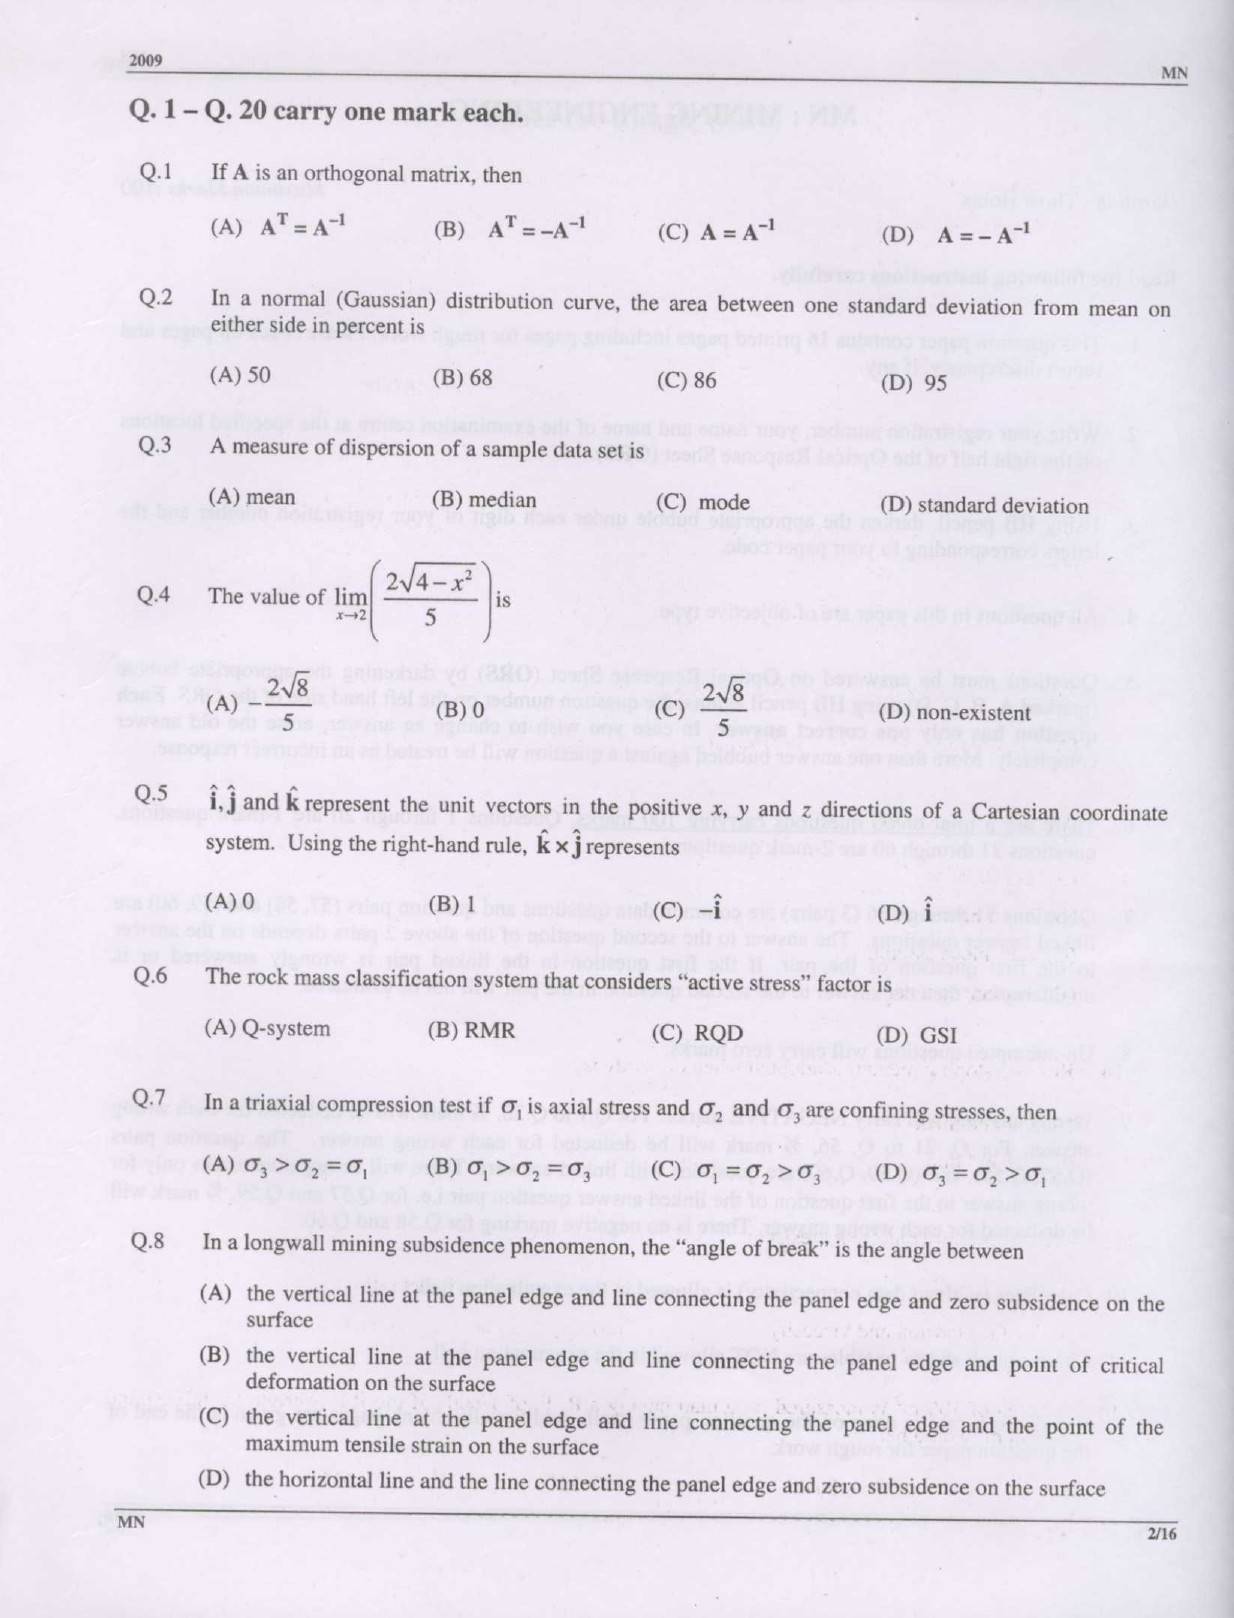 GATE Exam Question Paper 2009 Mining Engineering 2